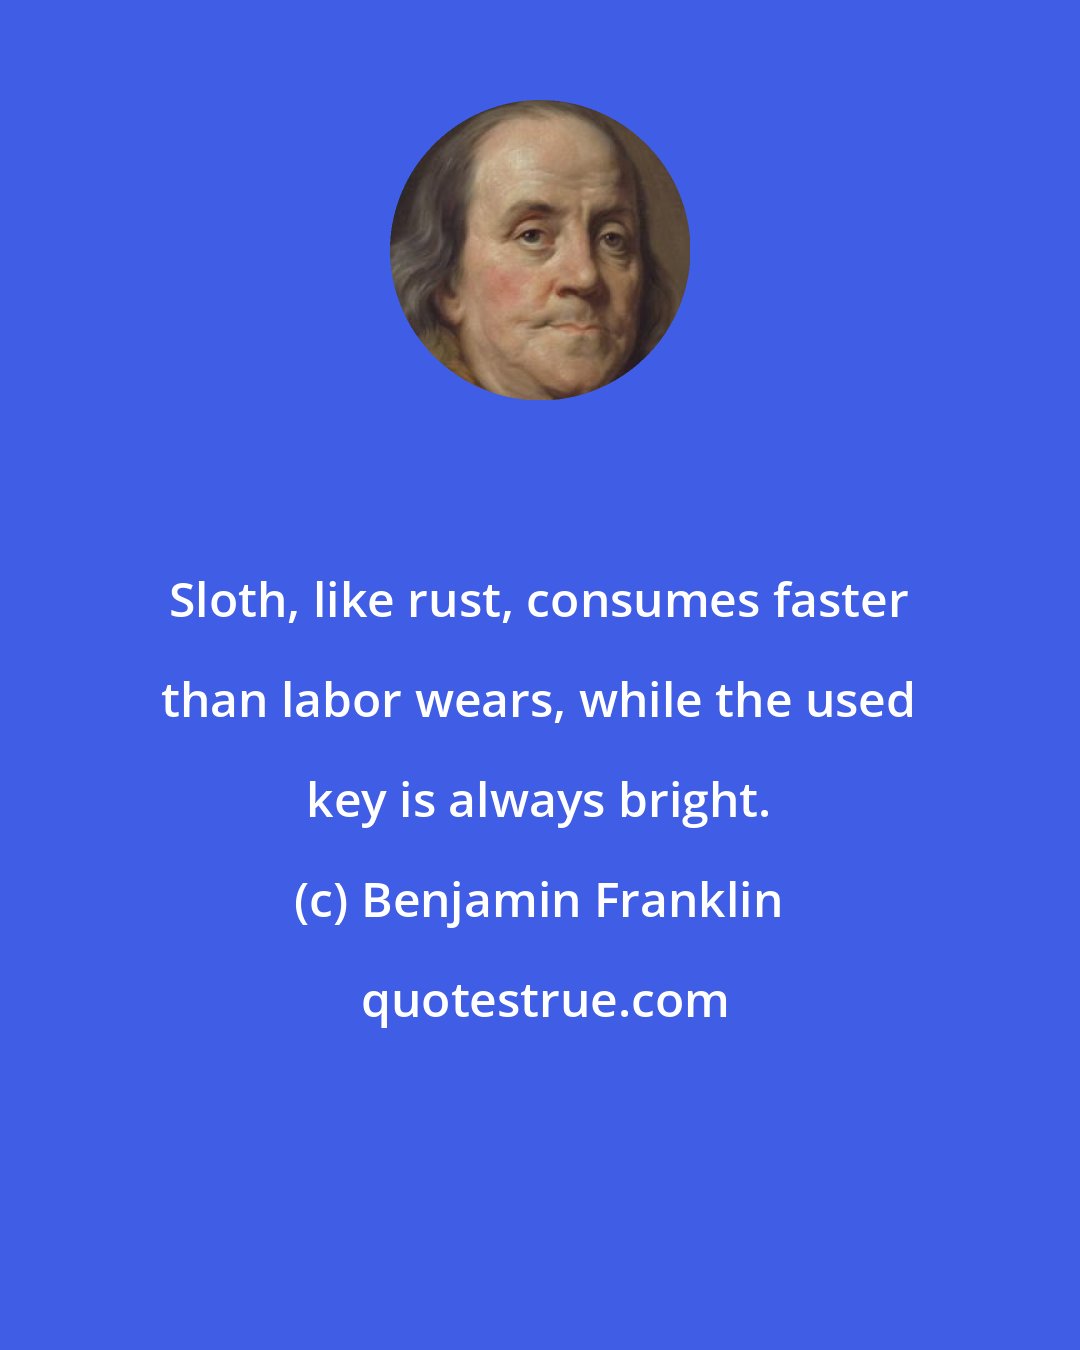 Benjamin Franklin: Sloth, like rust, consumes faster than labor wears, while the used key is always bright.